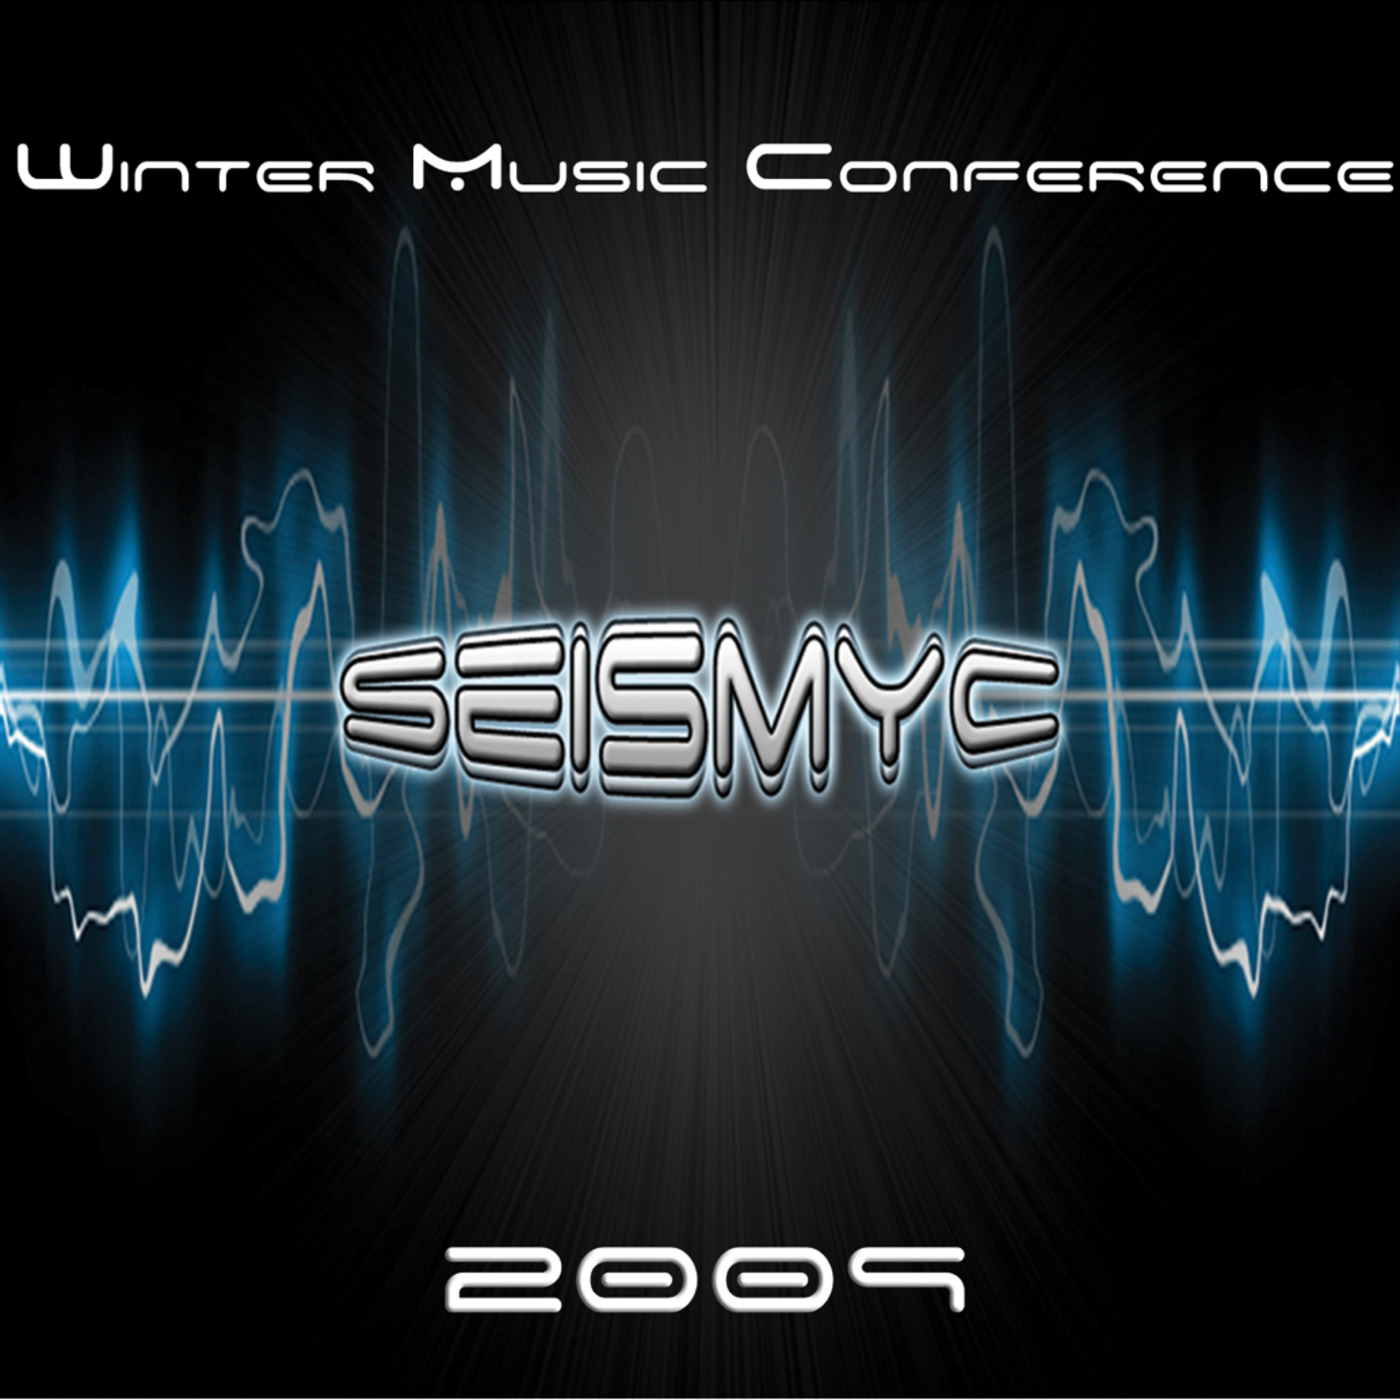 ~Seismyc~ Winter Music Conference 2009